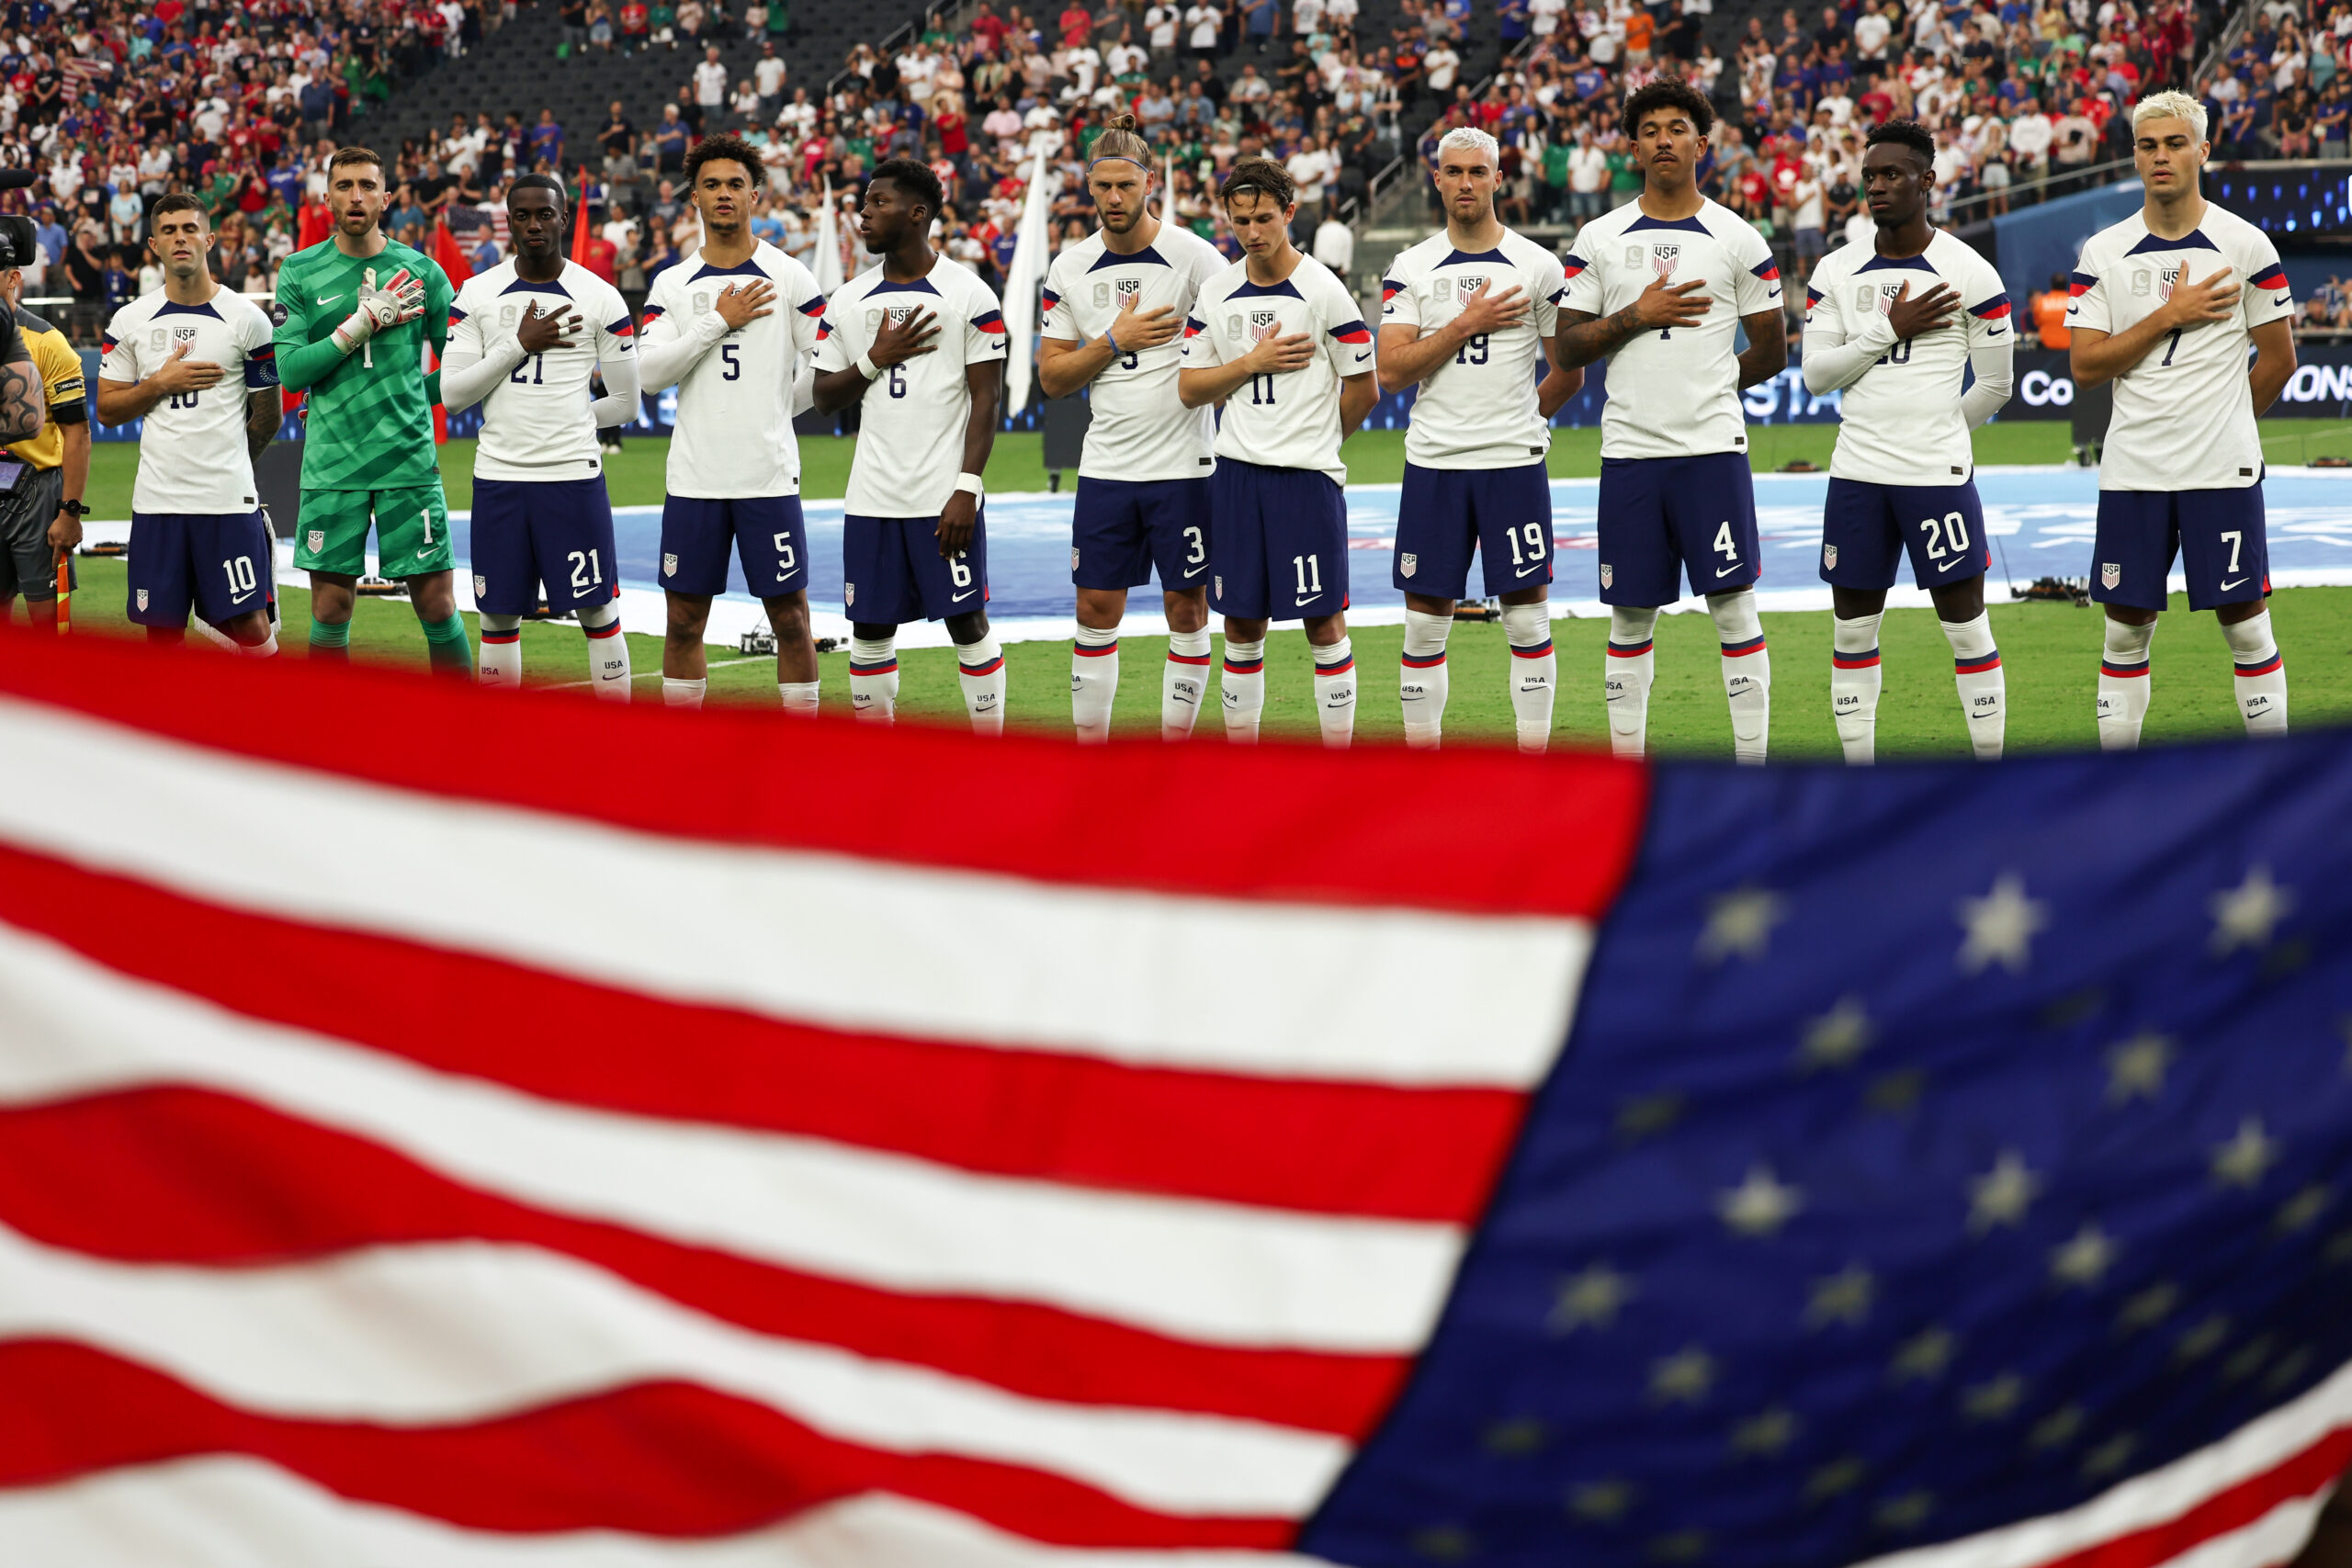 LAS VEGAS, NEVADA - JUNE 18: The USMNT sing the National Anthem in front the USA flag during the CONCACAF Nations League Final between Canada v United States at Allegiant Stadium on June 18, 2023 in Las Vegas, Nevada. (Photo by Matthew Ashton - AMA/Getty Images)